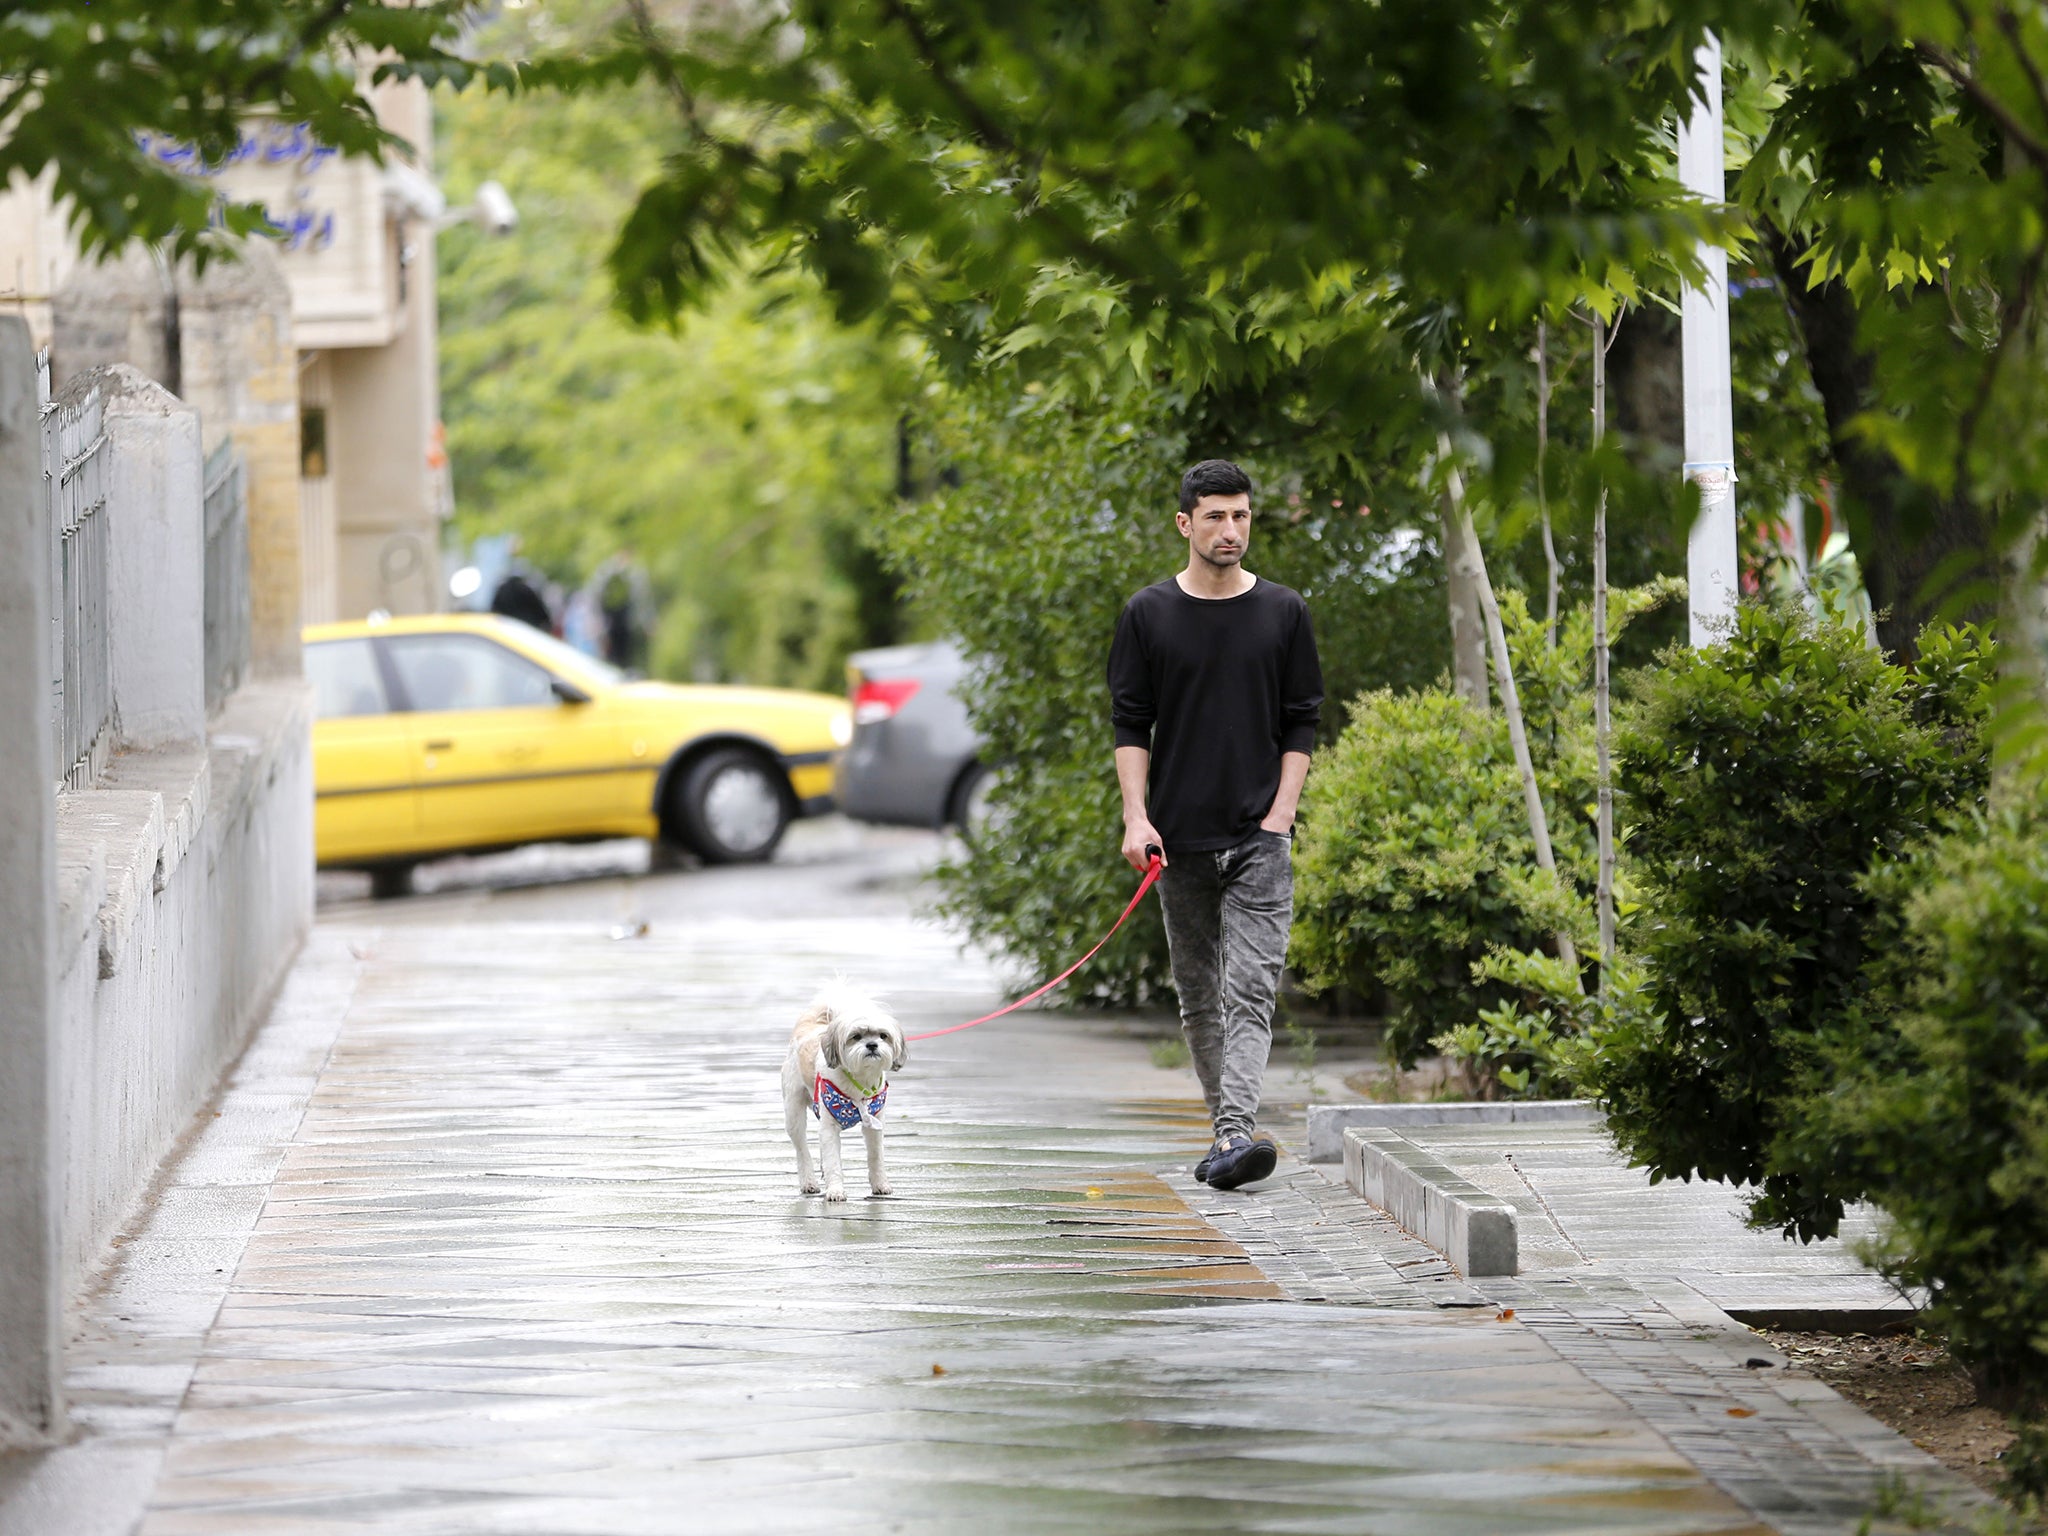 Dogs are everywhere in Tehran, despite authorities taking a dim view on ownership